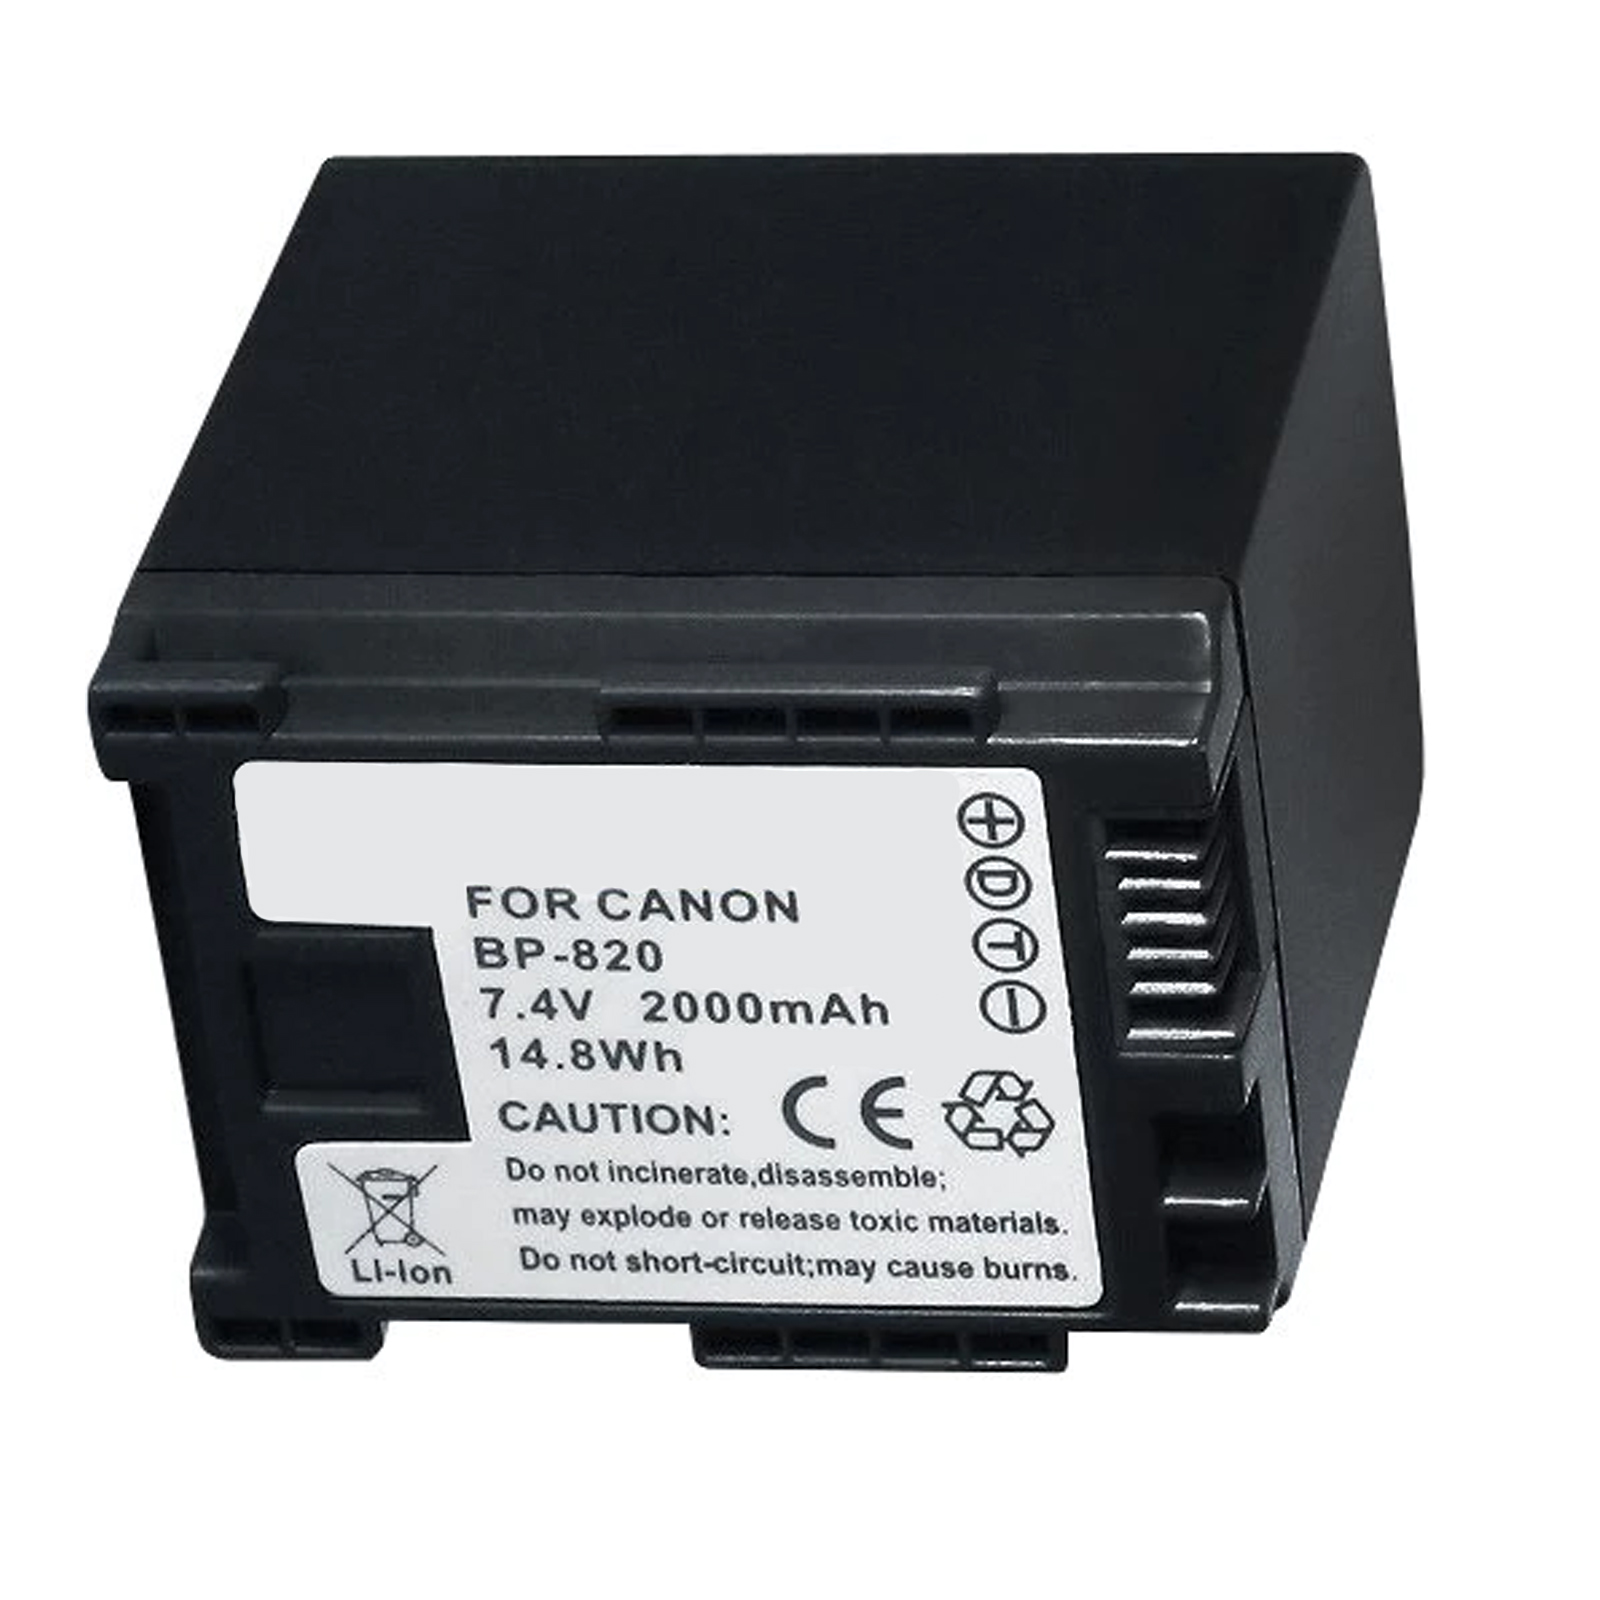 BP-820 Lithium-ion Battery - Ultra High Capacity (2000 mAh 7.4V) - Replacement for the Canon BP-820 Camera Battery